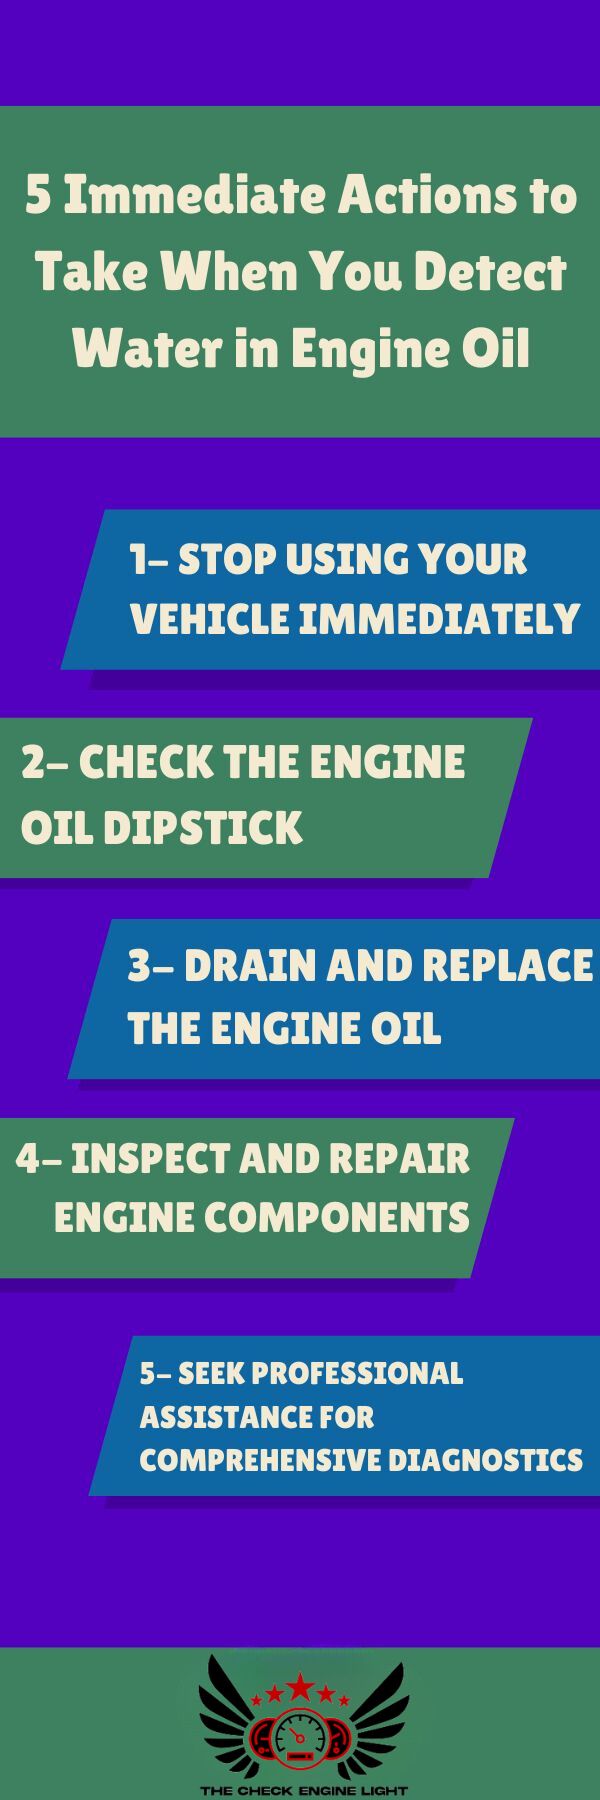 infographic for 5 Immediate Actions to Take When You Detect Water in Engine Oil